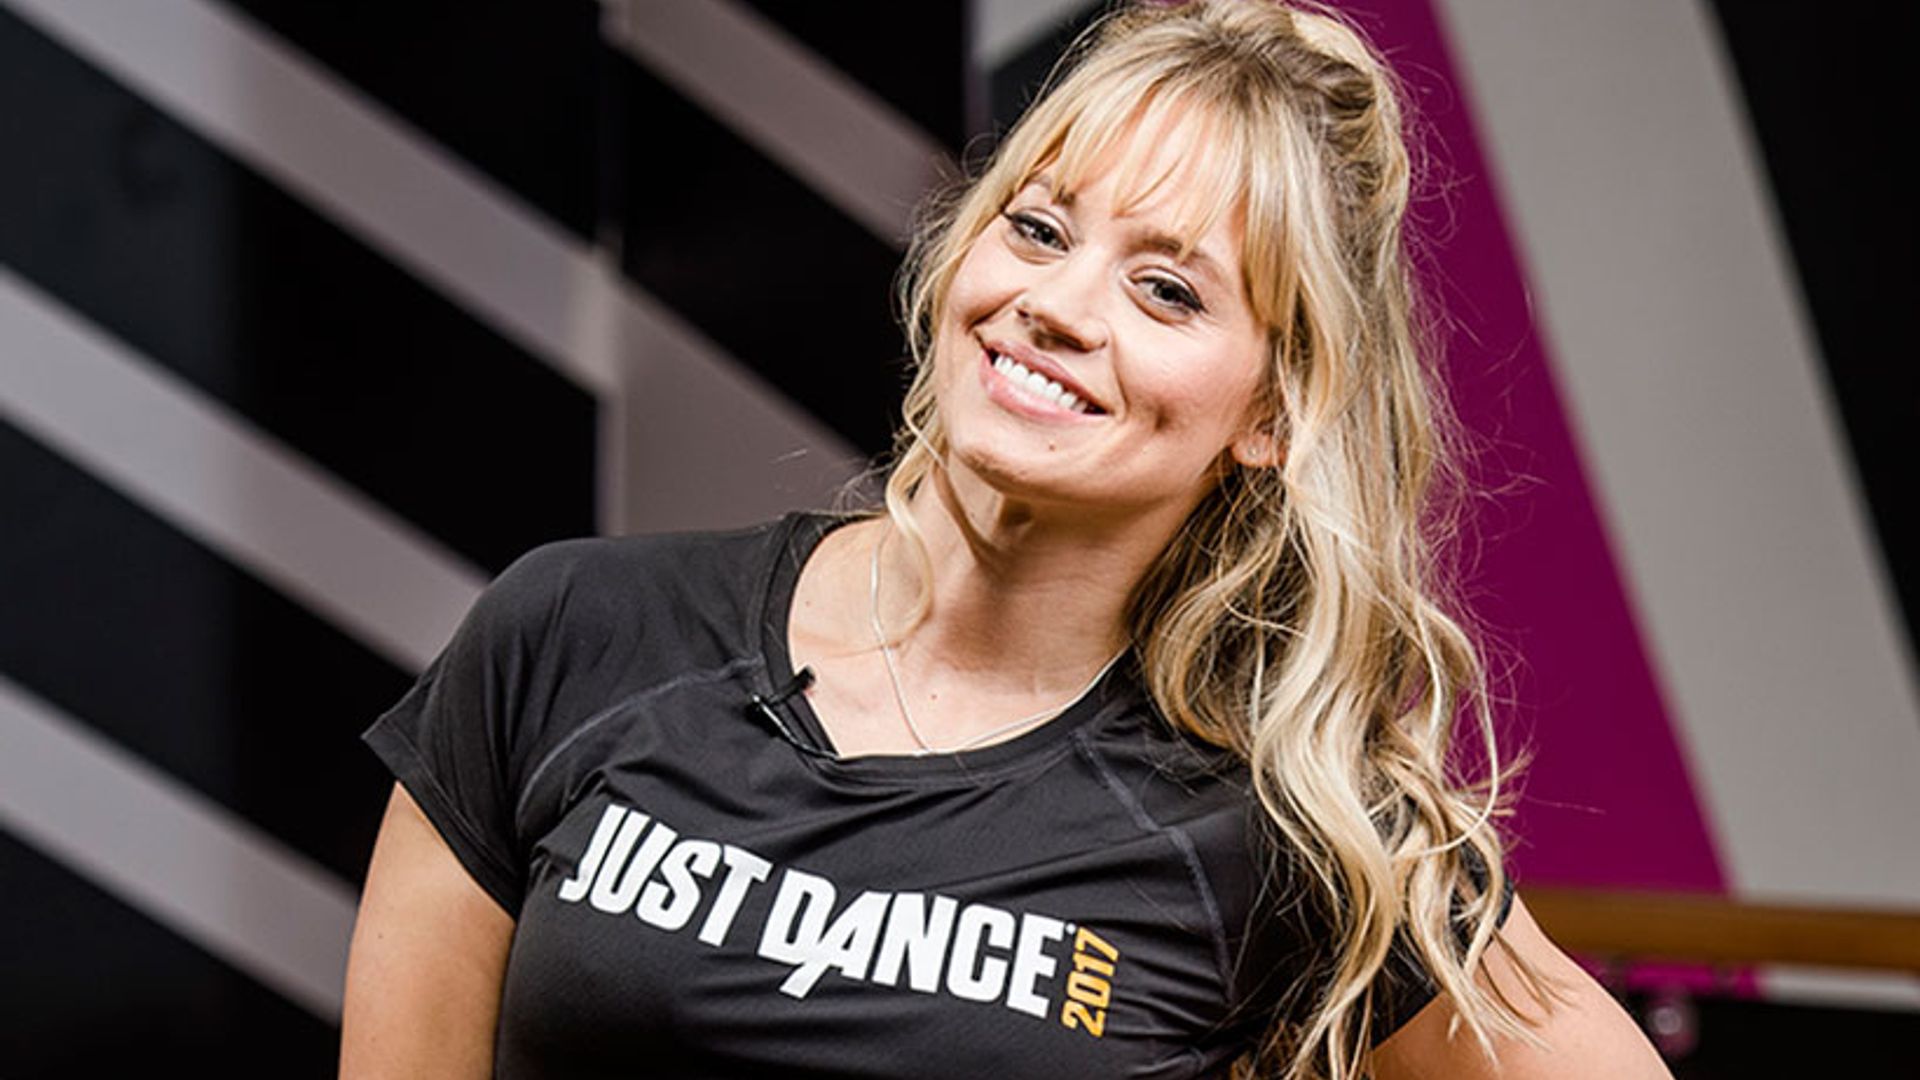 Kimberly Wyatt reveals daughter Willow loves to copy her dance moves: 'We enjoy those moments the most'